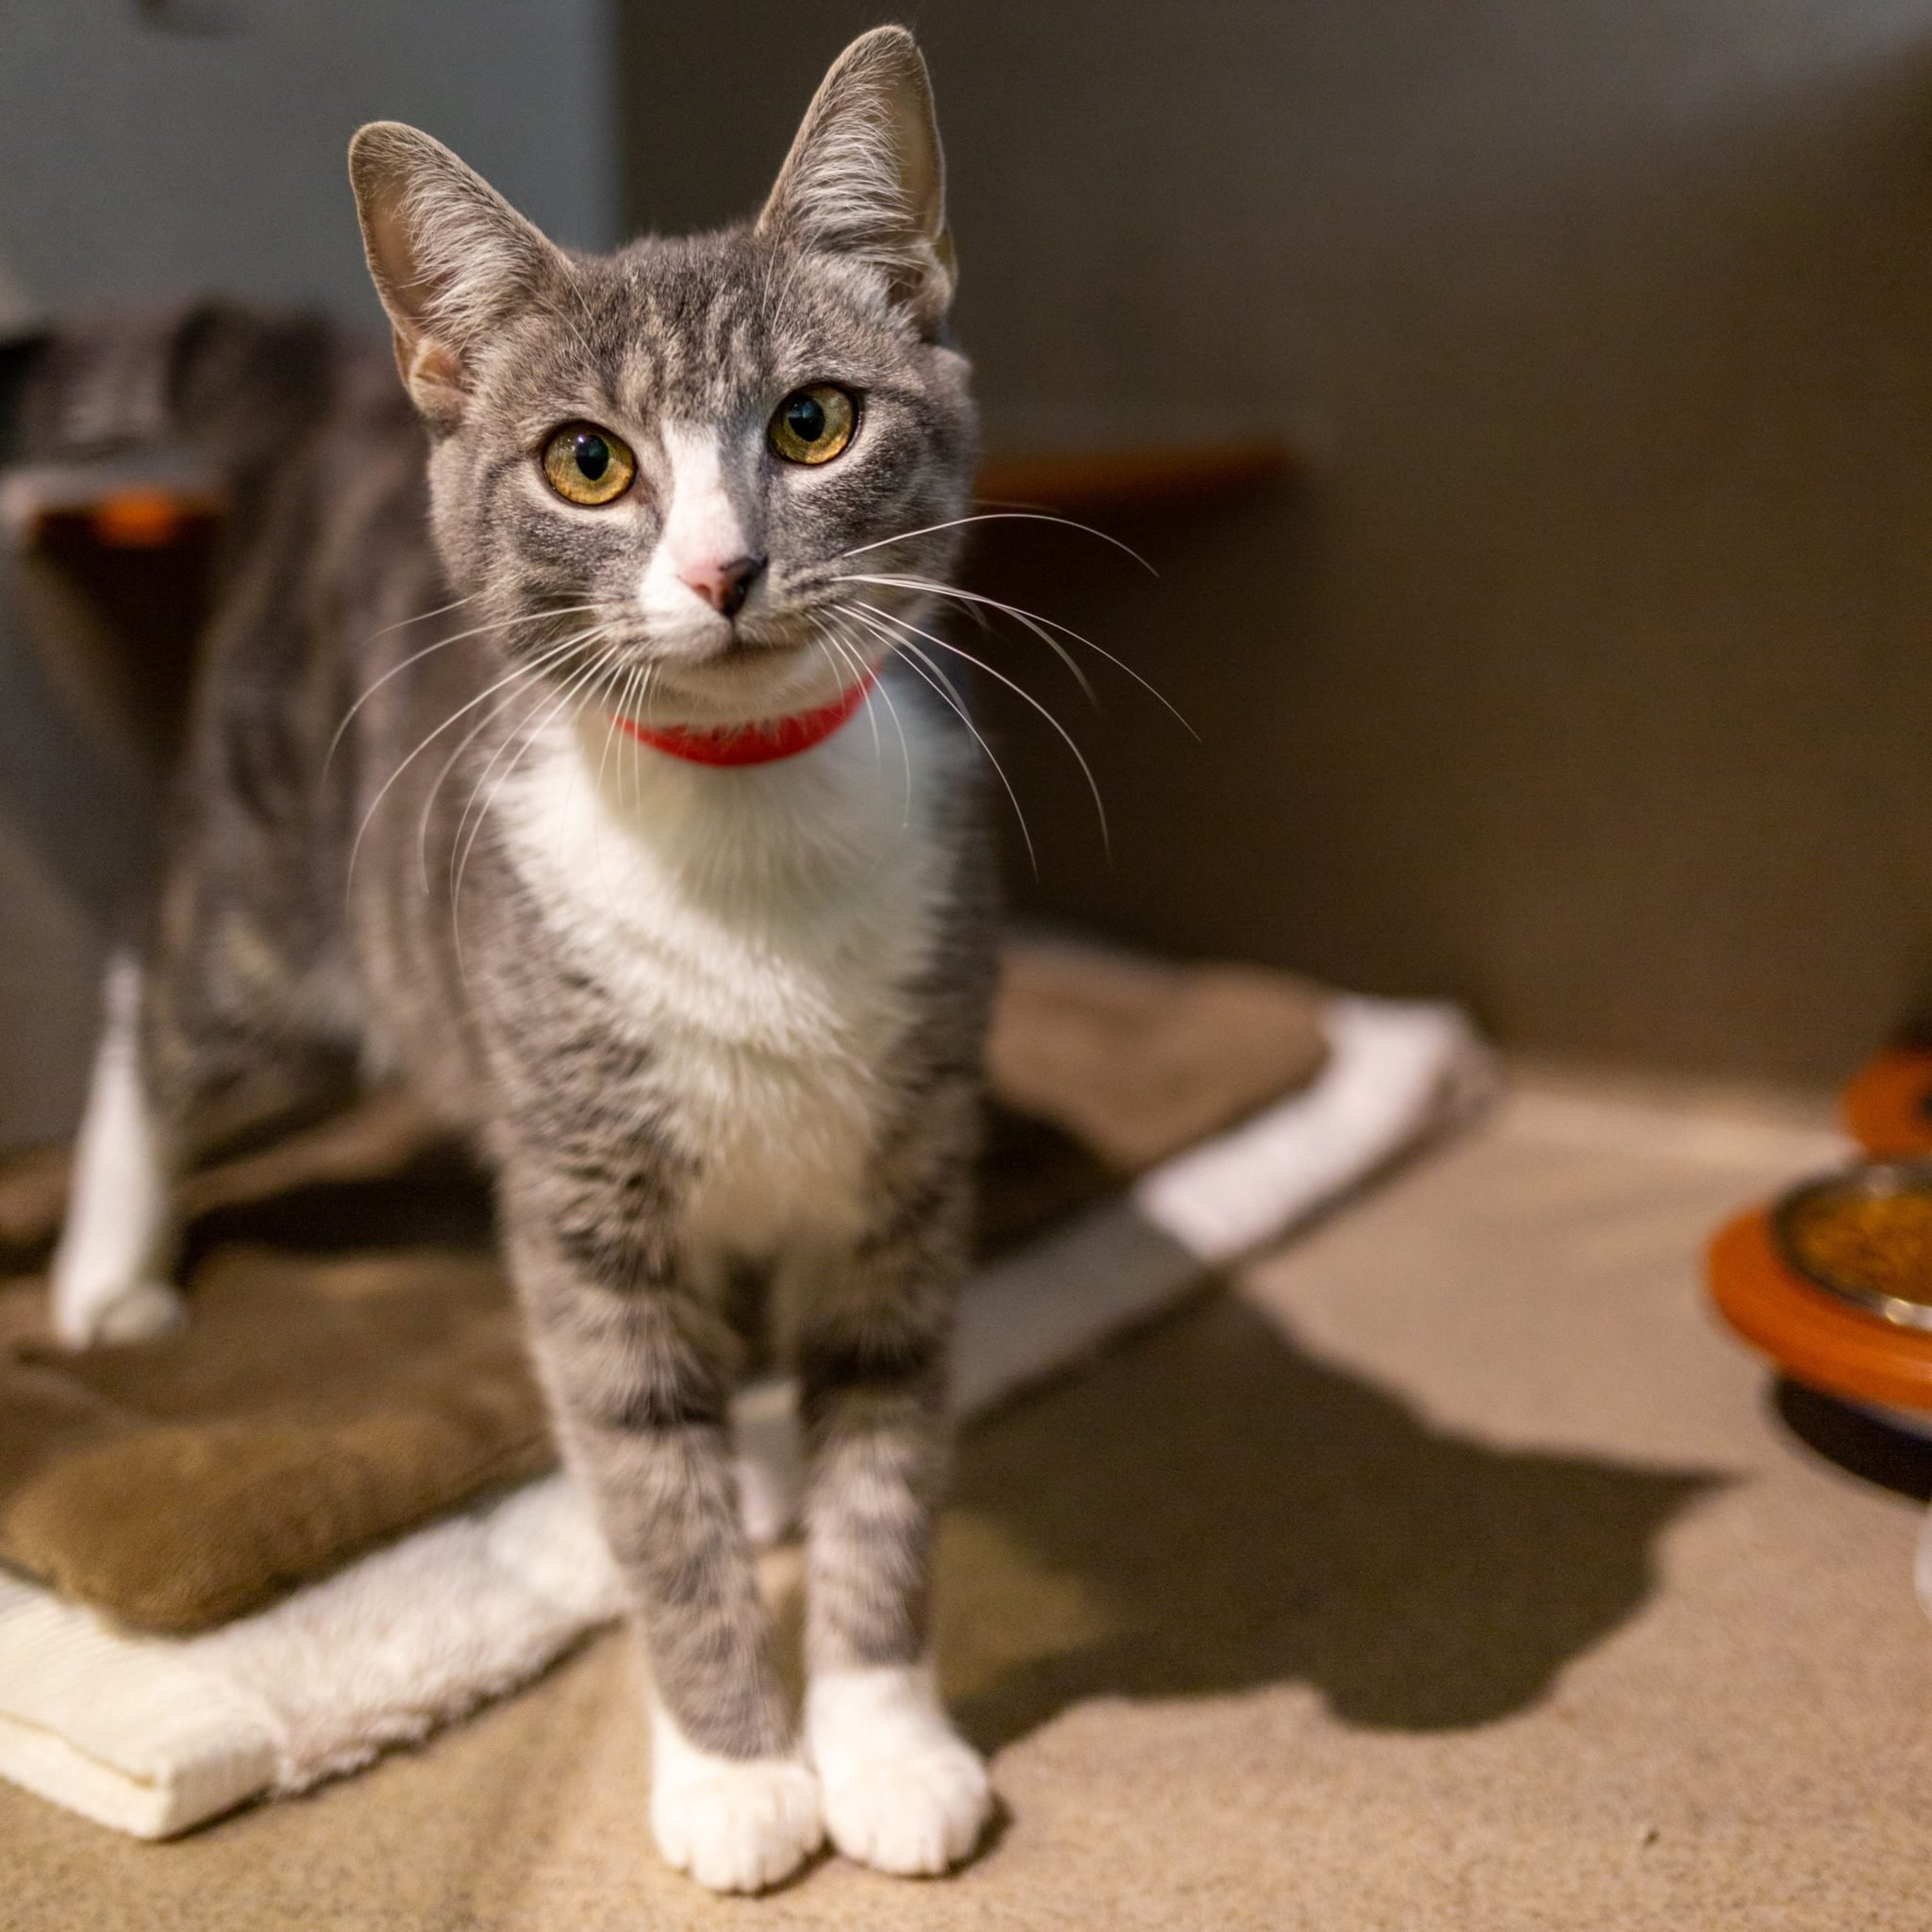  You  Can  Adopt a Cat  for Free at DC s Humane Rescue Alliance